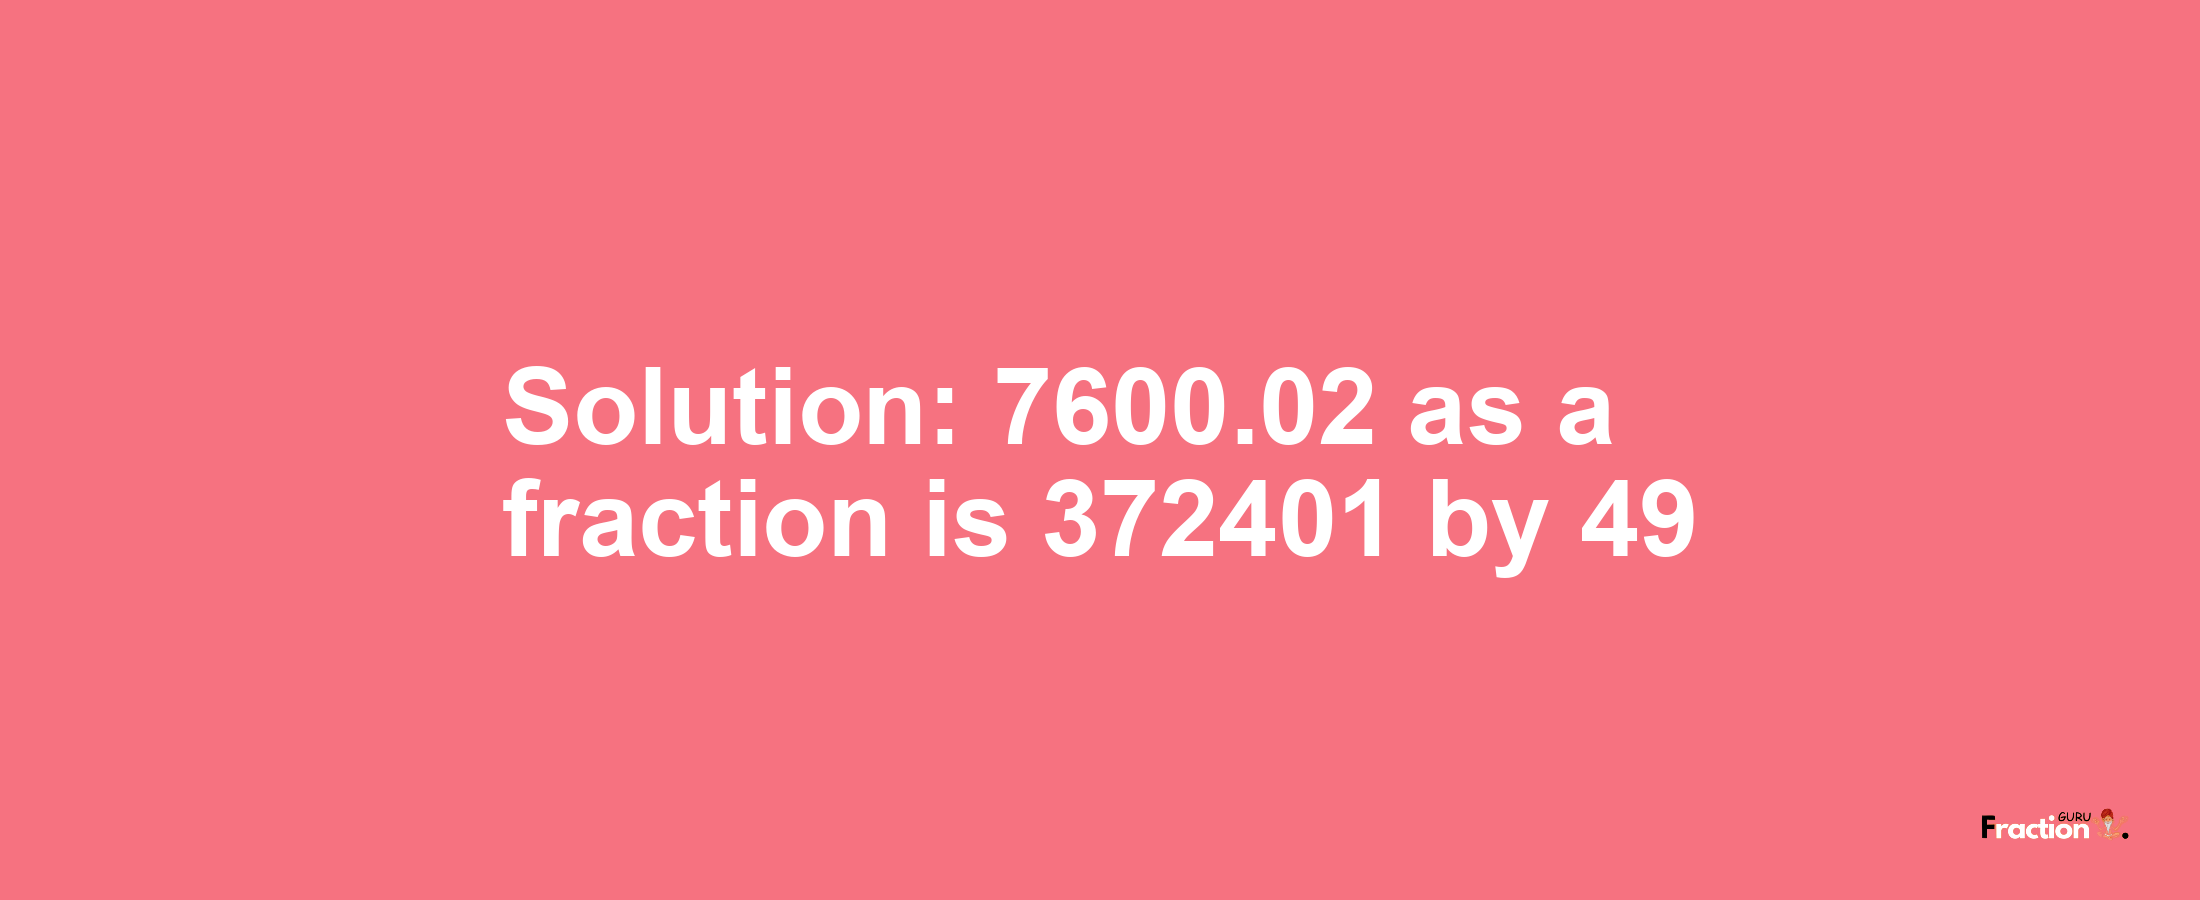 Solution:7600.02 as a fraction is 372401/49